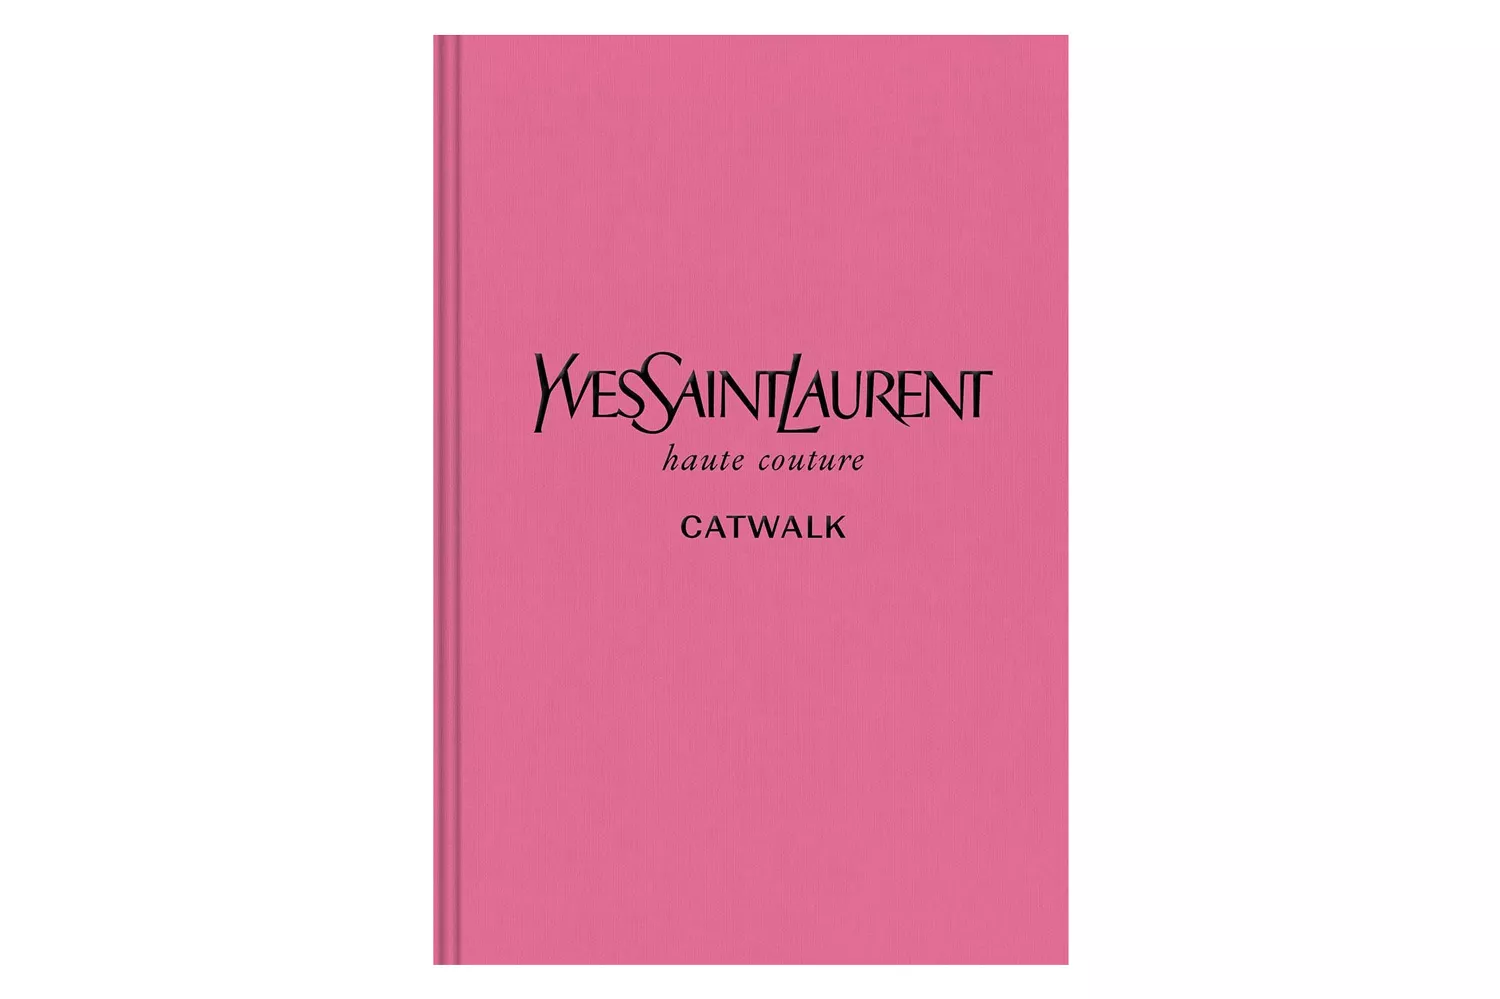 Yves Saint Laurent: The Complete Haute Couture Collections